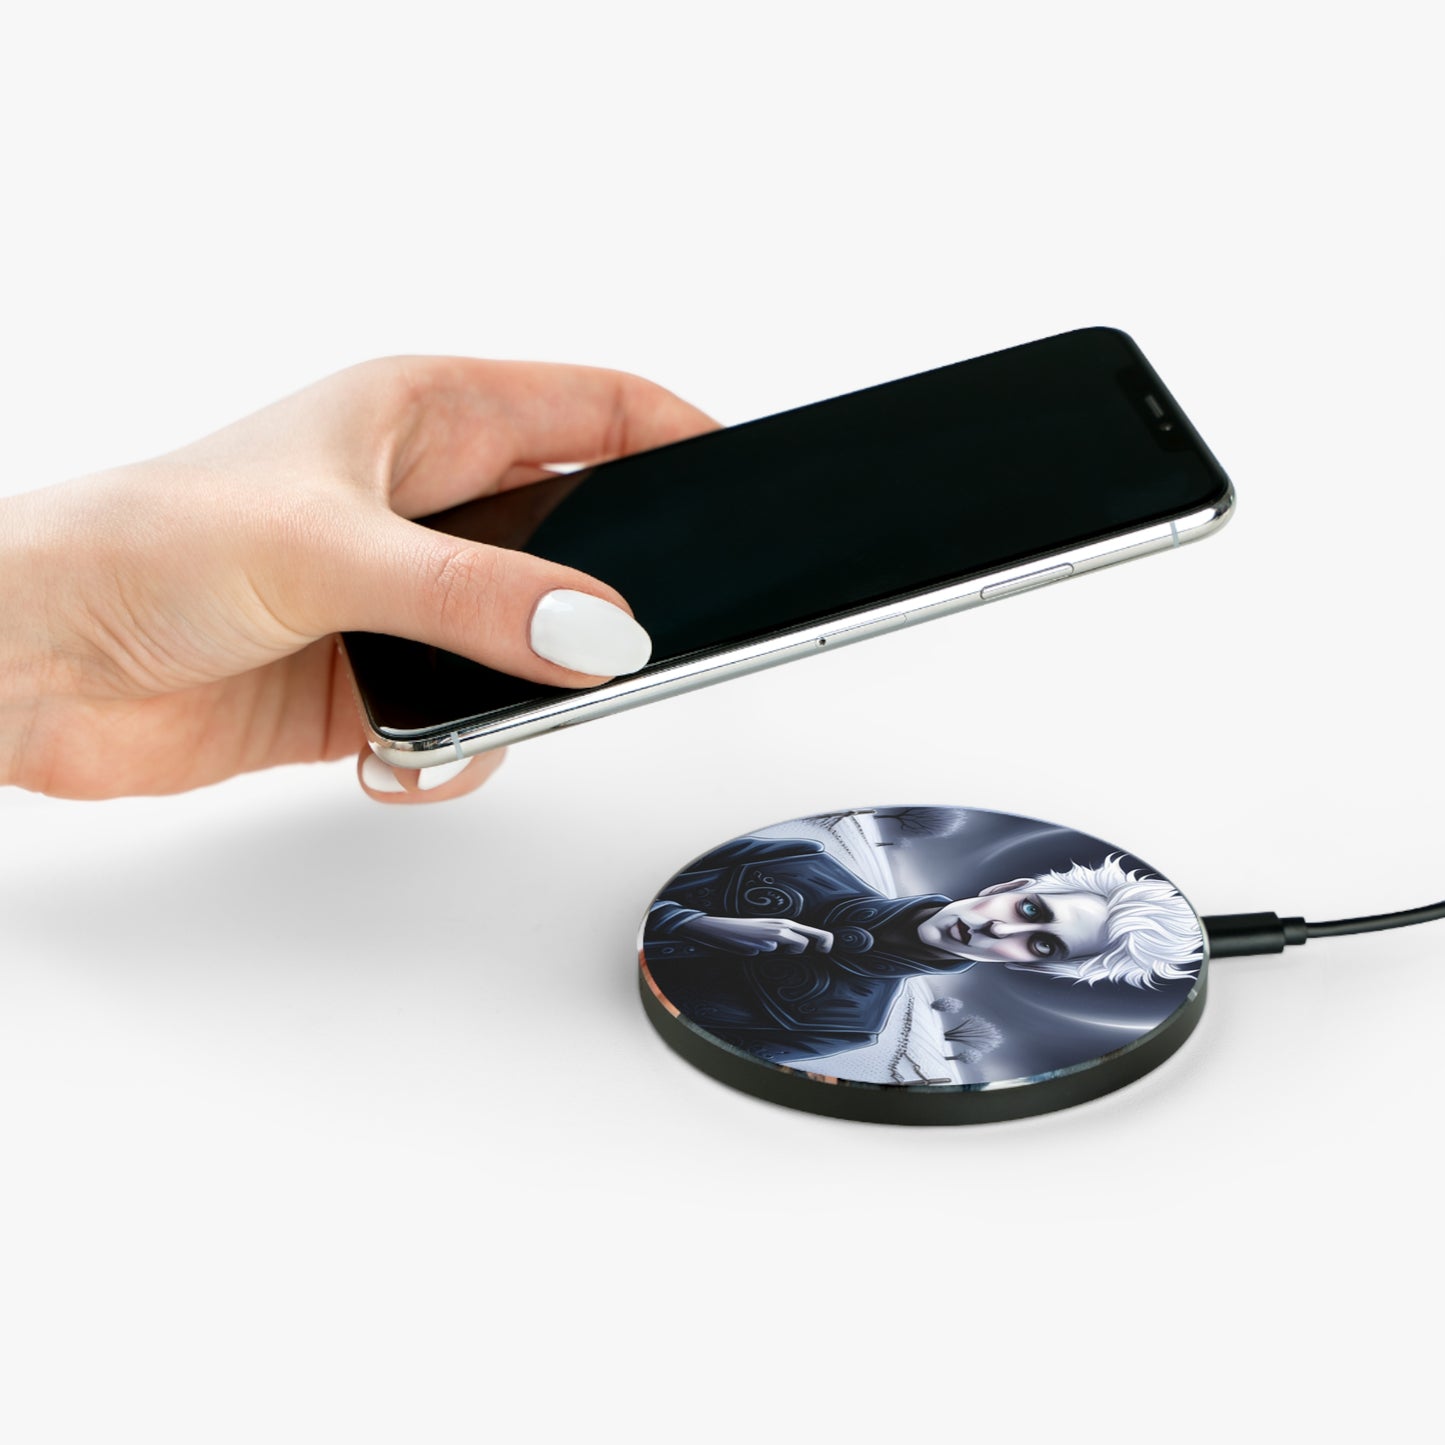 Gothic Jack Frost Wireless Charger